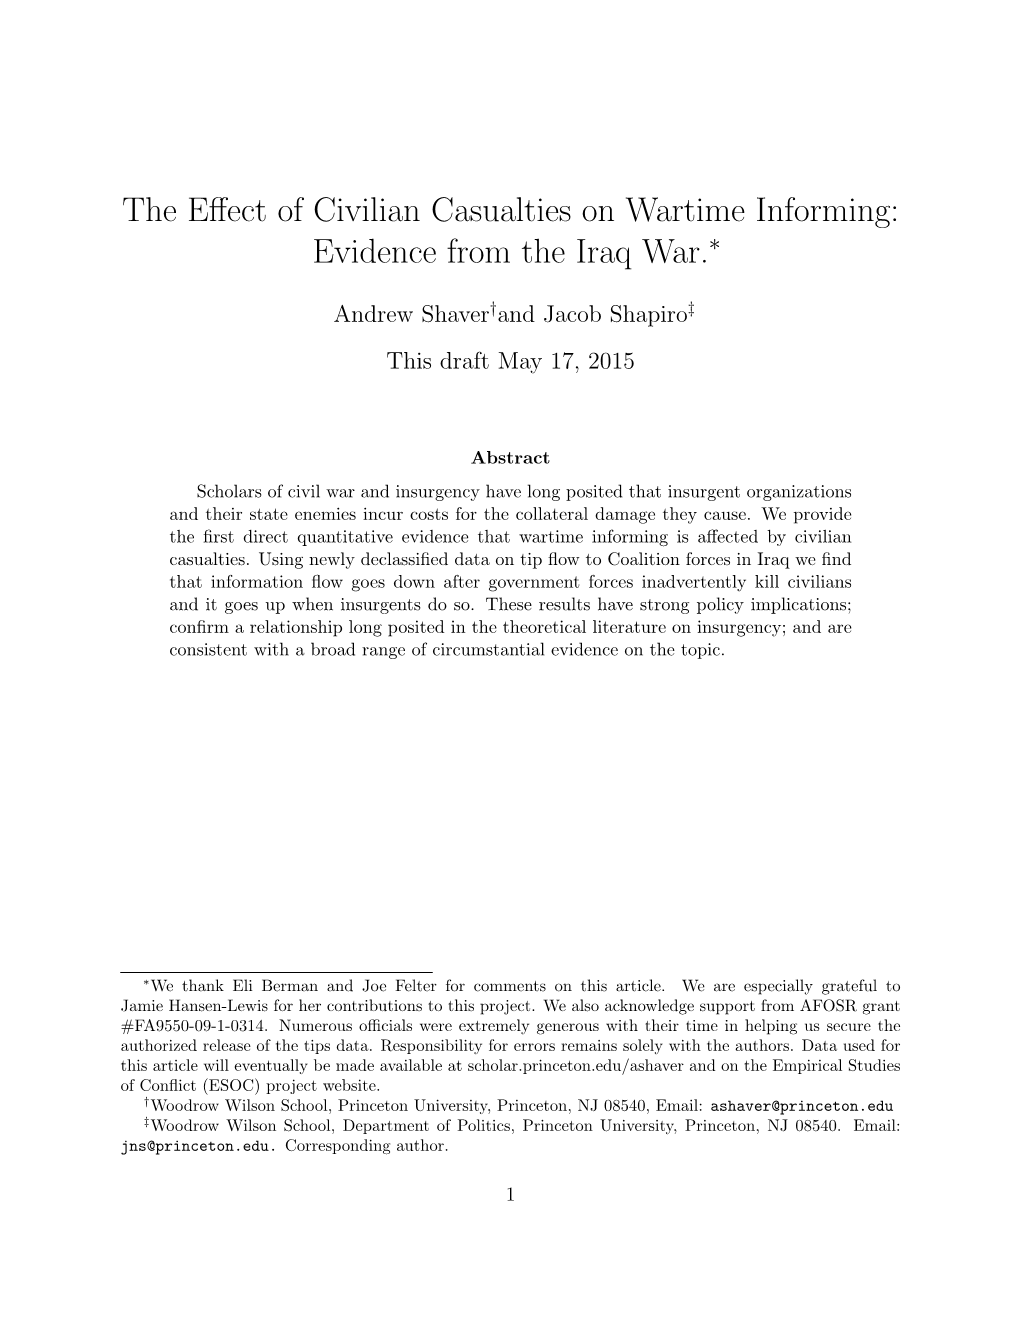 The Effect of Civilian Casualties on Wartime Informing: Evidence From